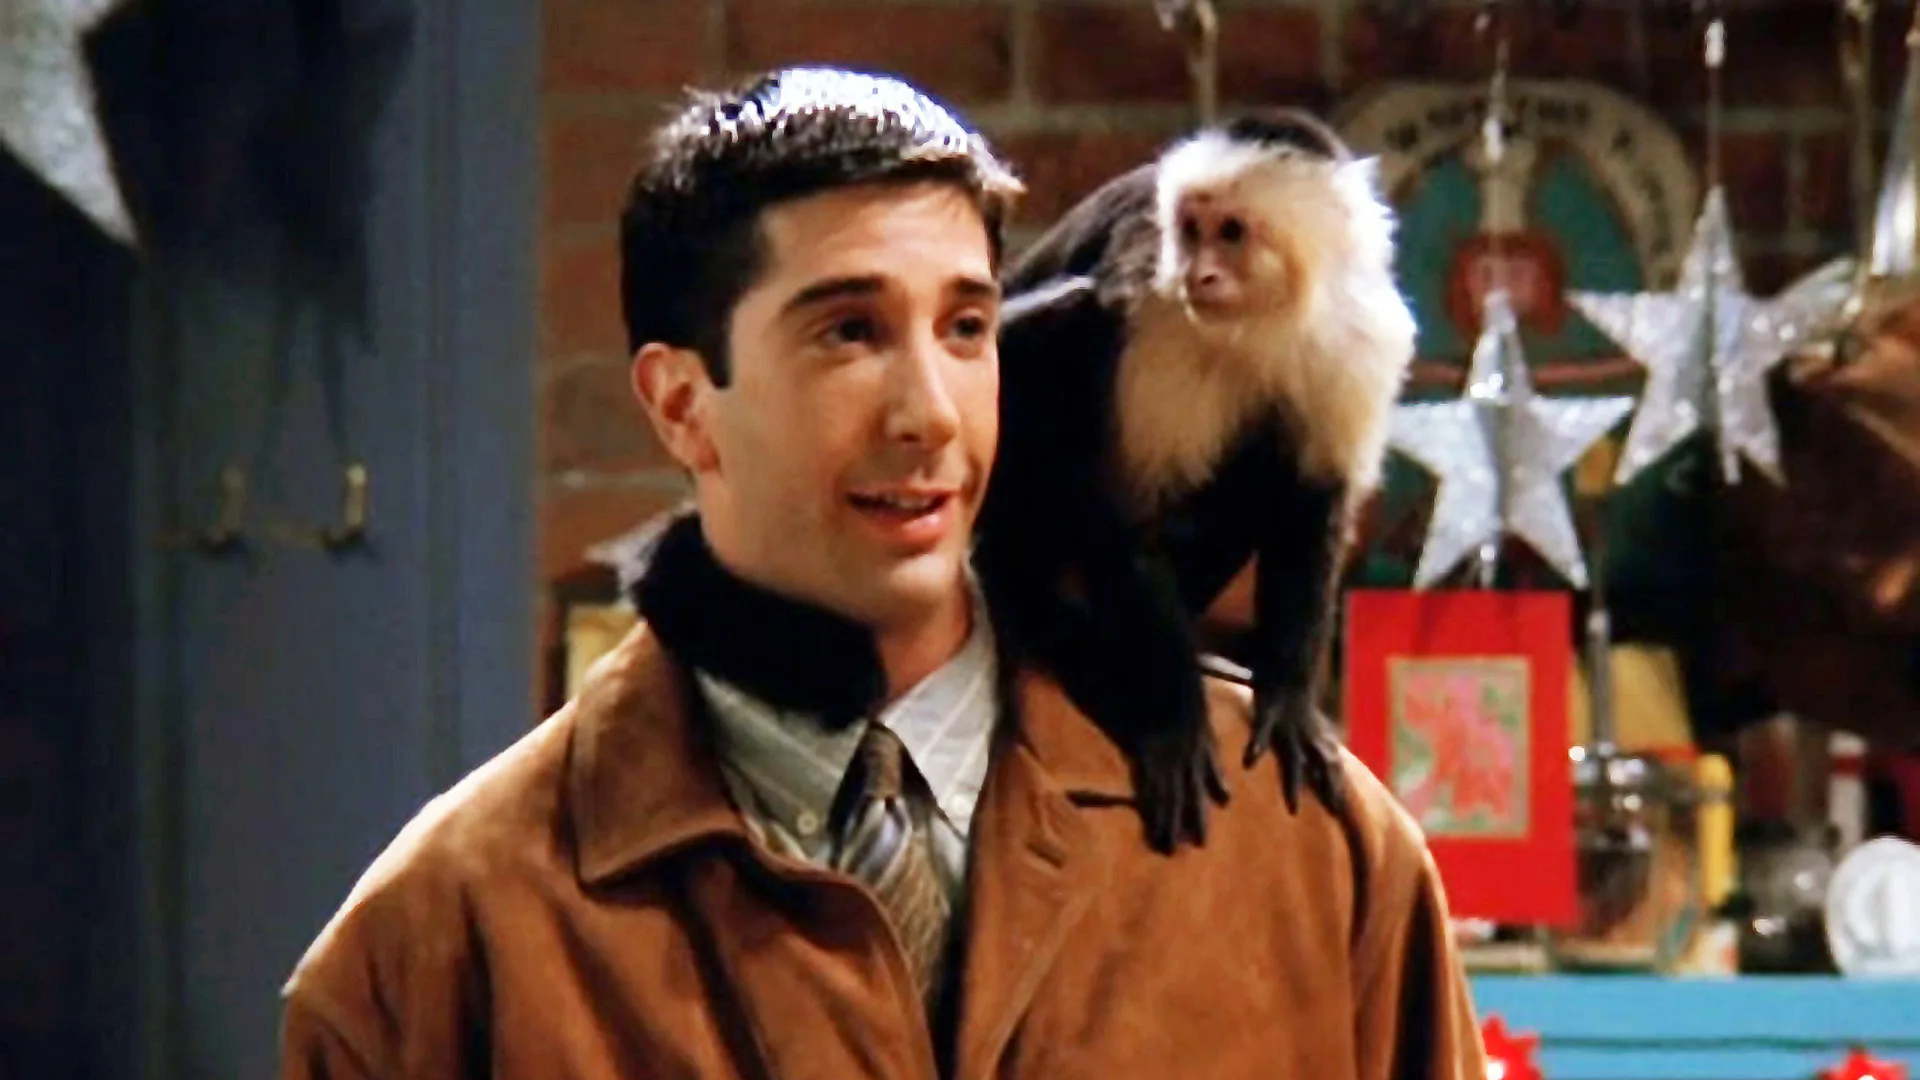 David Schimmer as the character Ross in Friends with a black and white monkey on his shoulder